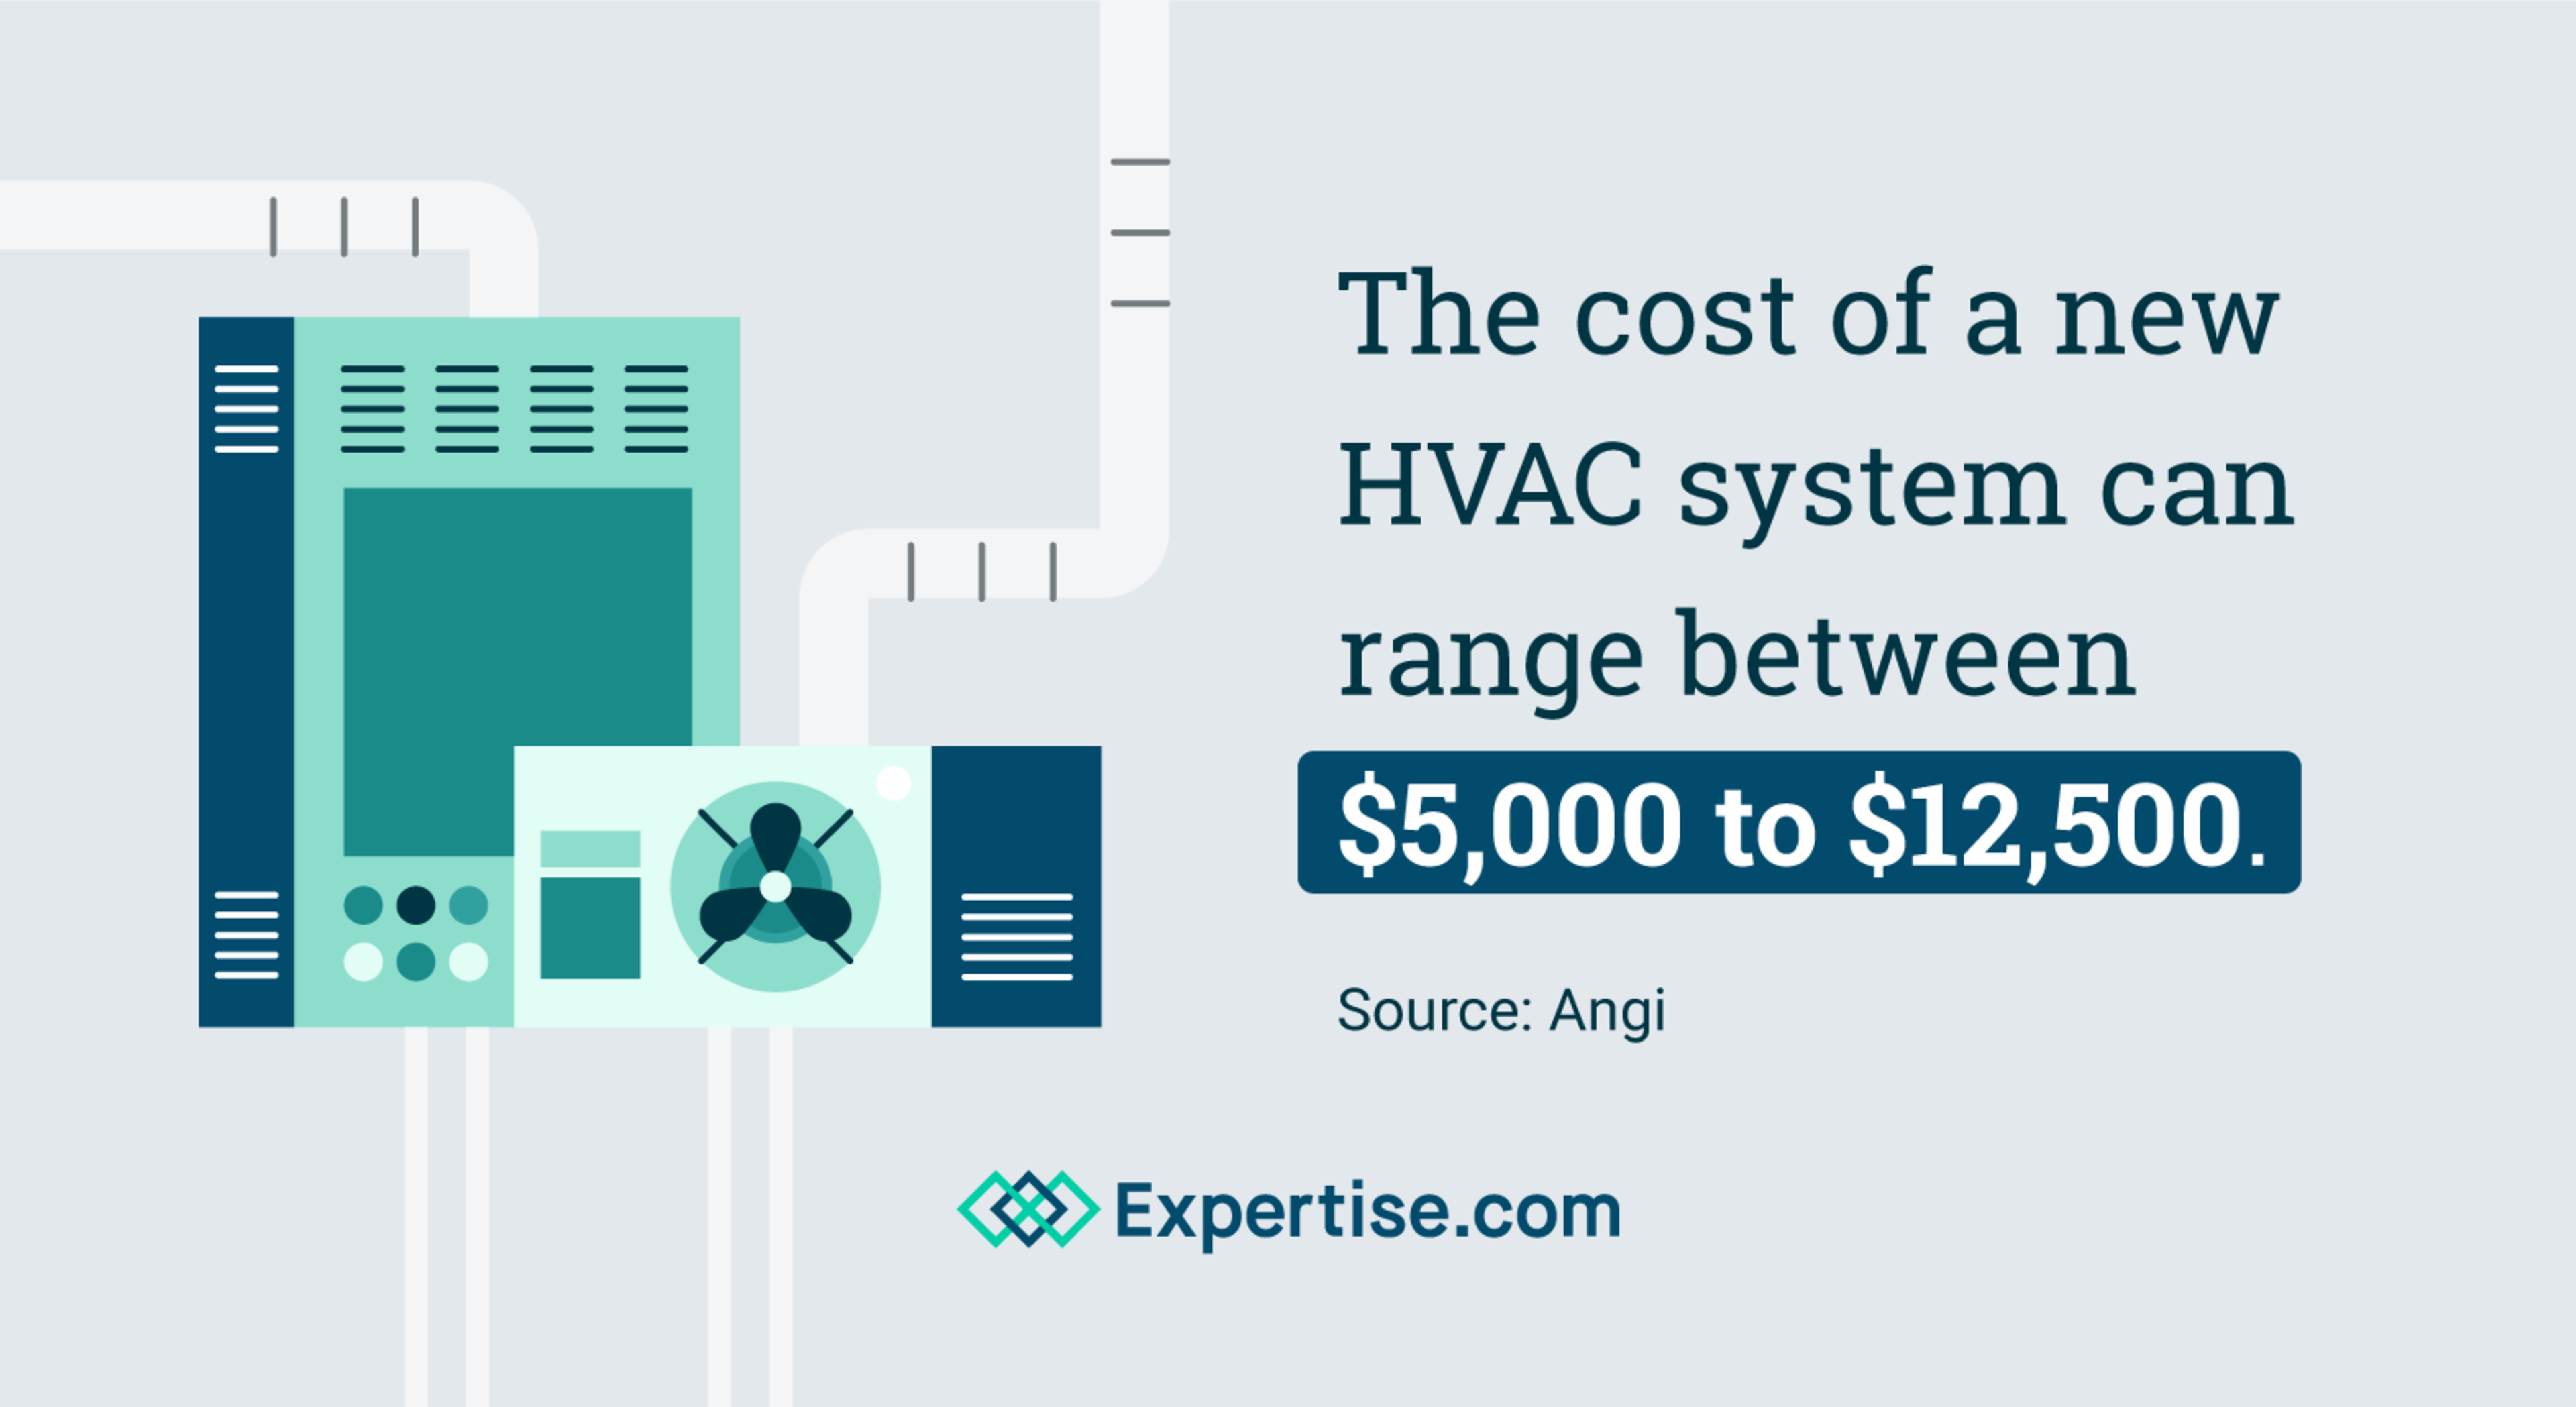 Cost of a new HVAC system